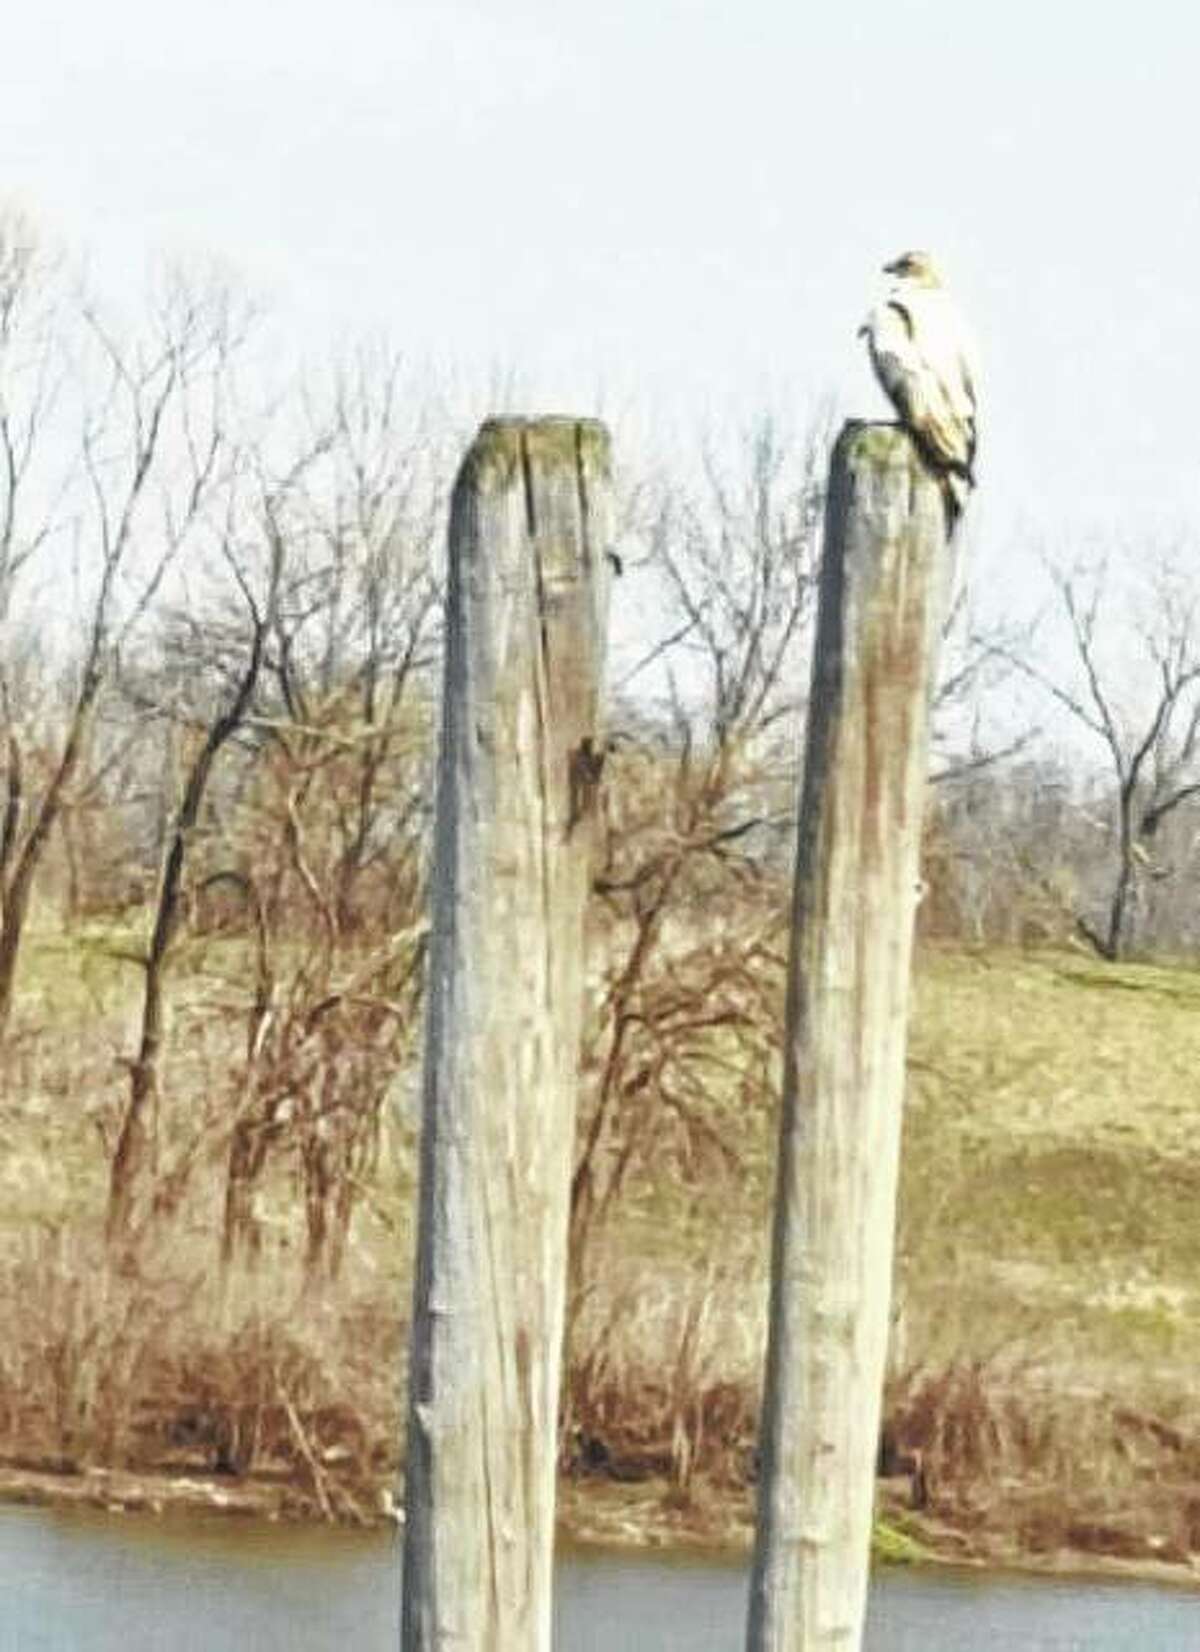 A leucistic bald eagle sits perched at the Beardstown Marina. Leucism is a condition in which birds have reduced pigmentation in their feathers. The condition is considered rare.